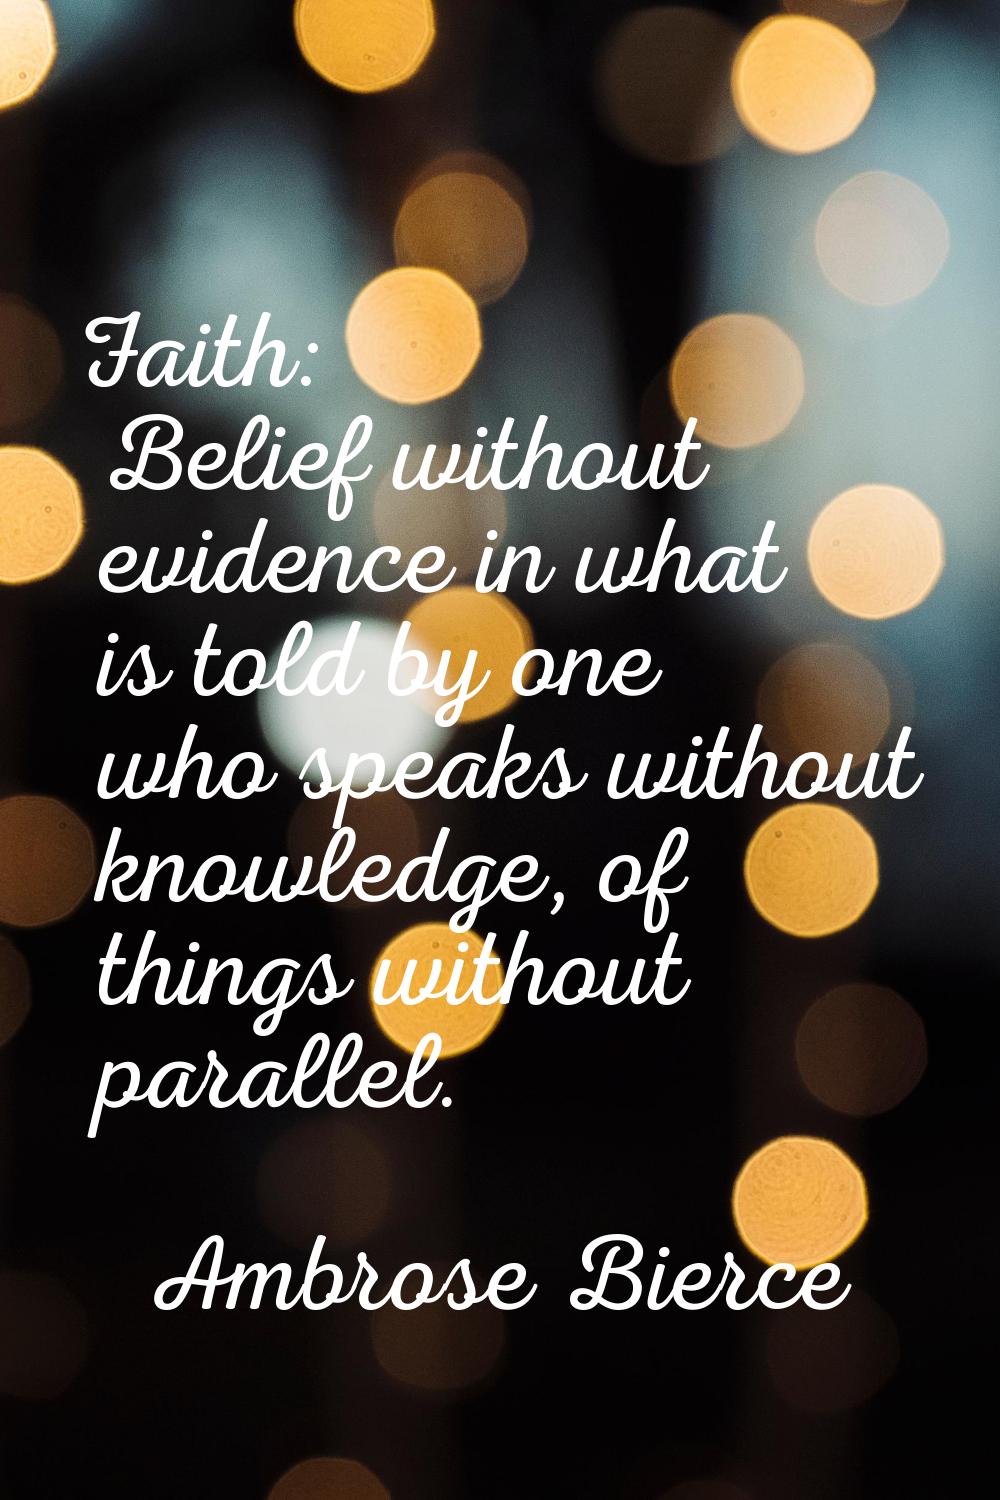 Faith: Belief without evidence in what is told by one who speaks without knowledge, of things witho